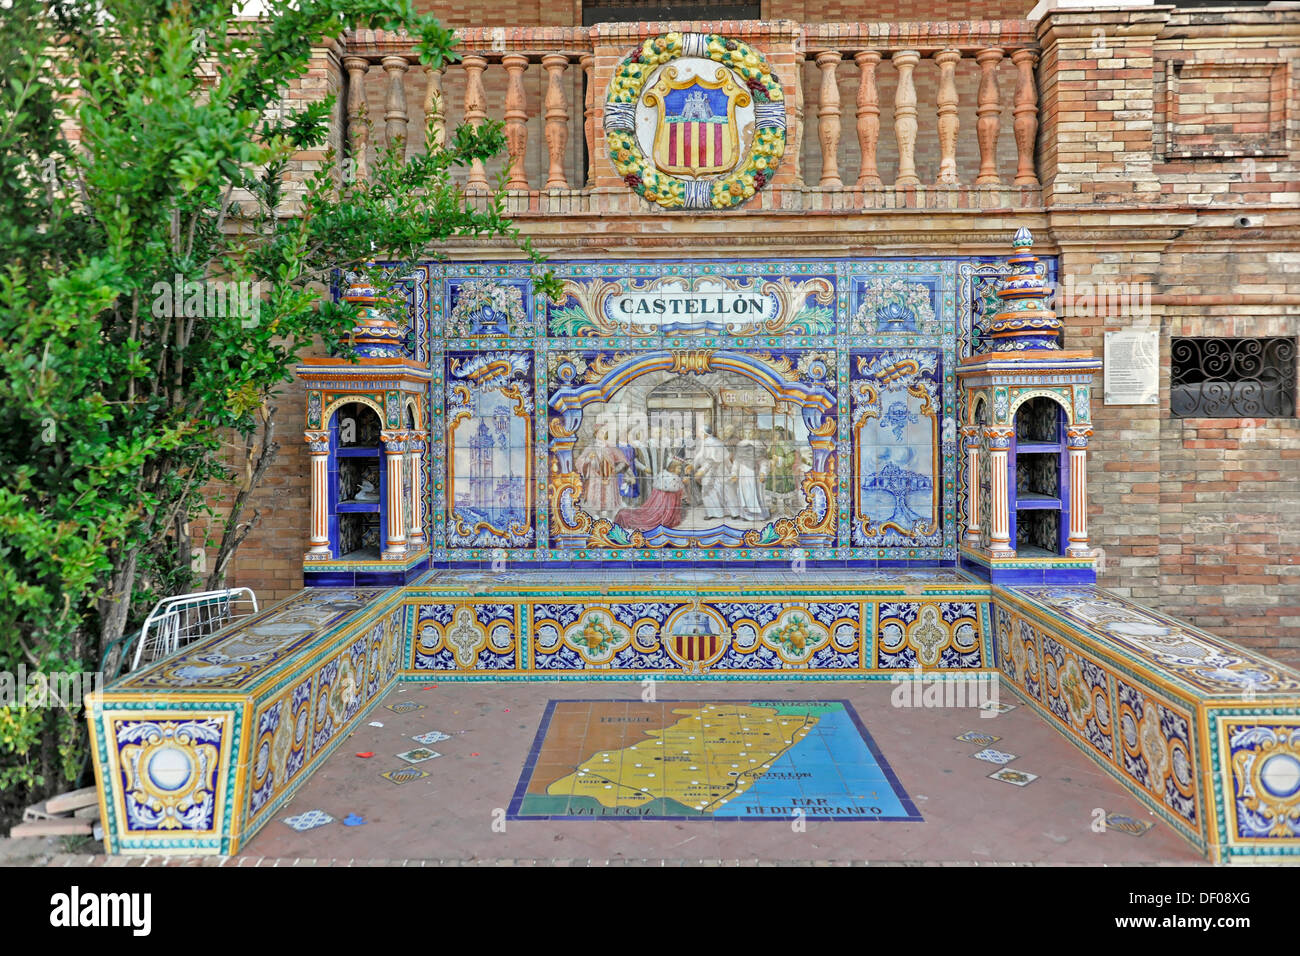 Castellon, colourful tiles with images from the Spanish regions, Plaza de España, Sevilla, Andalusia, Spain, Europe Stock Photo